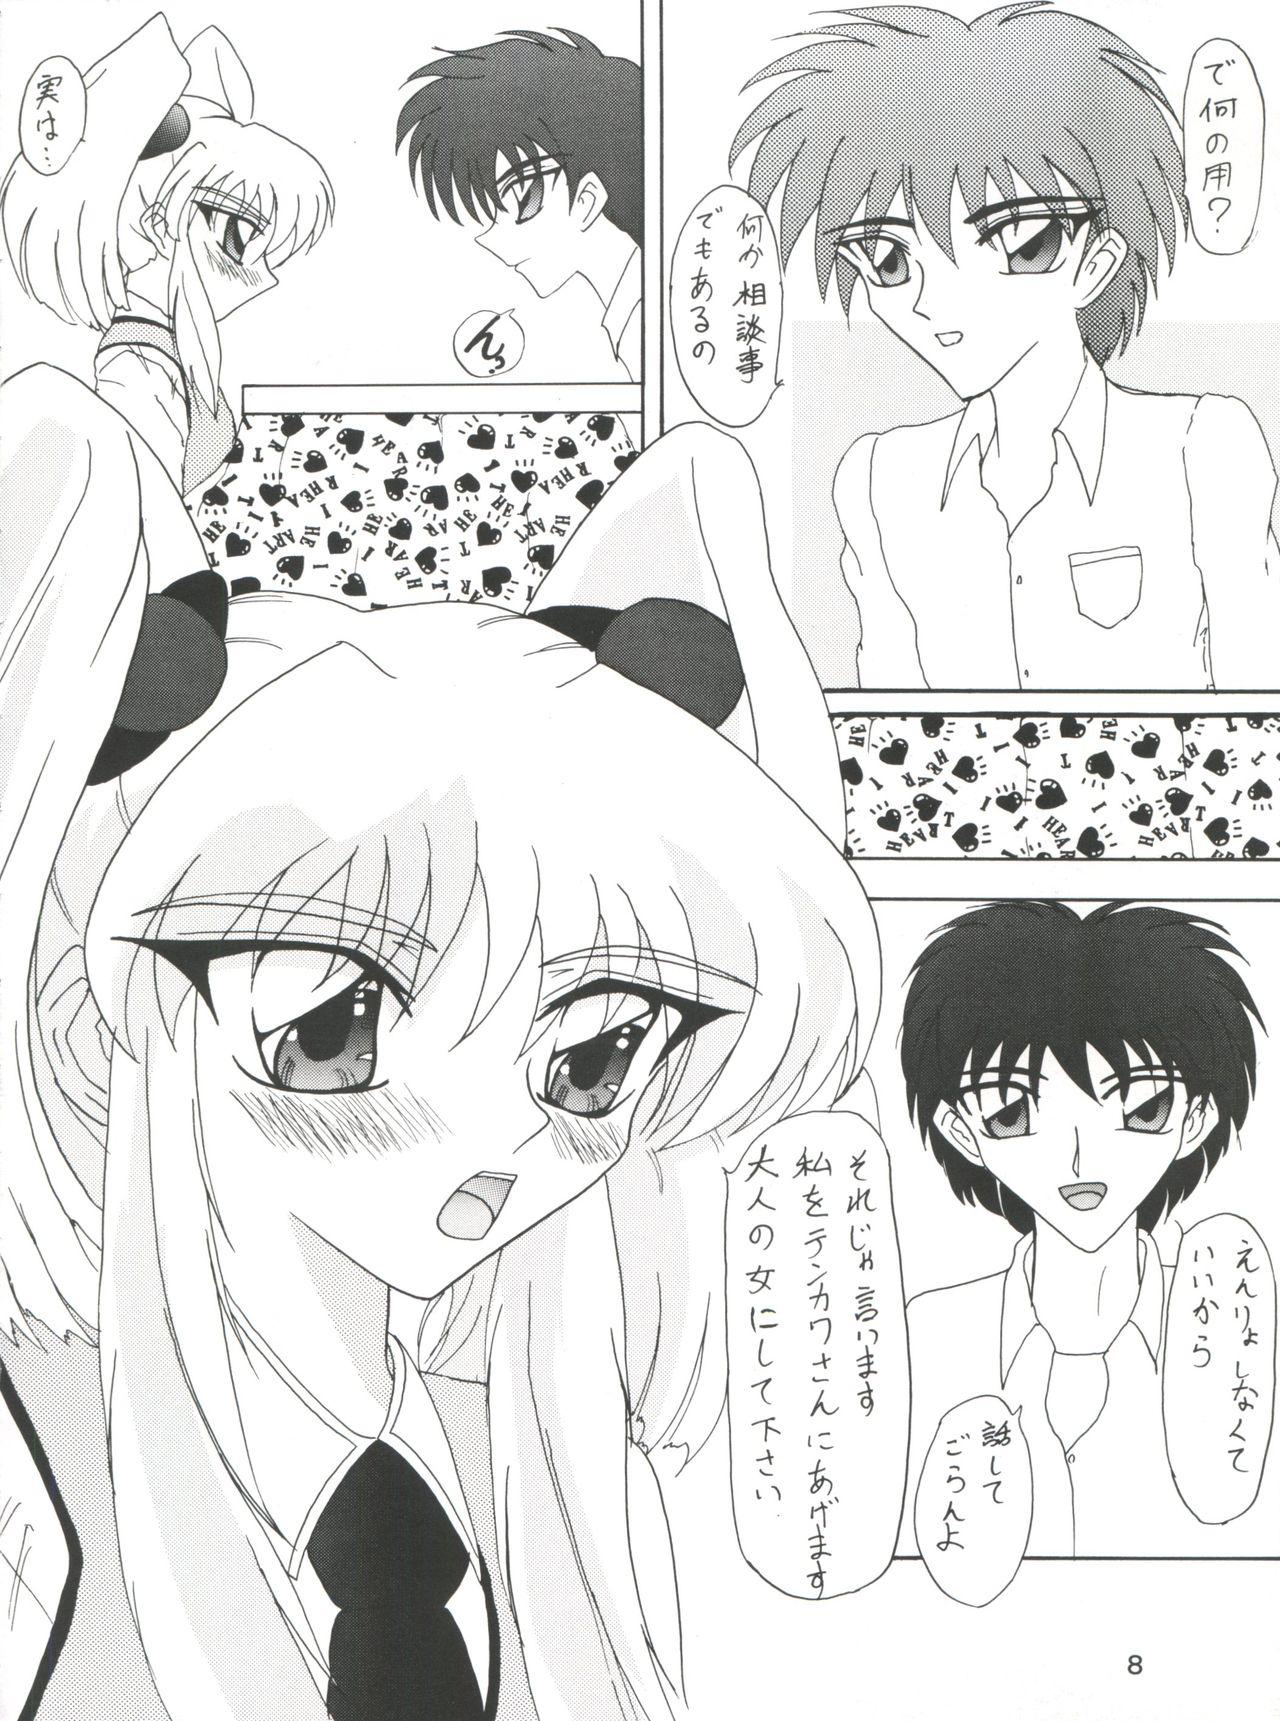 Fat Pussy PROMINENT 11 - Martian successor nadesico Cum Inside - Page 8